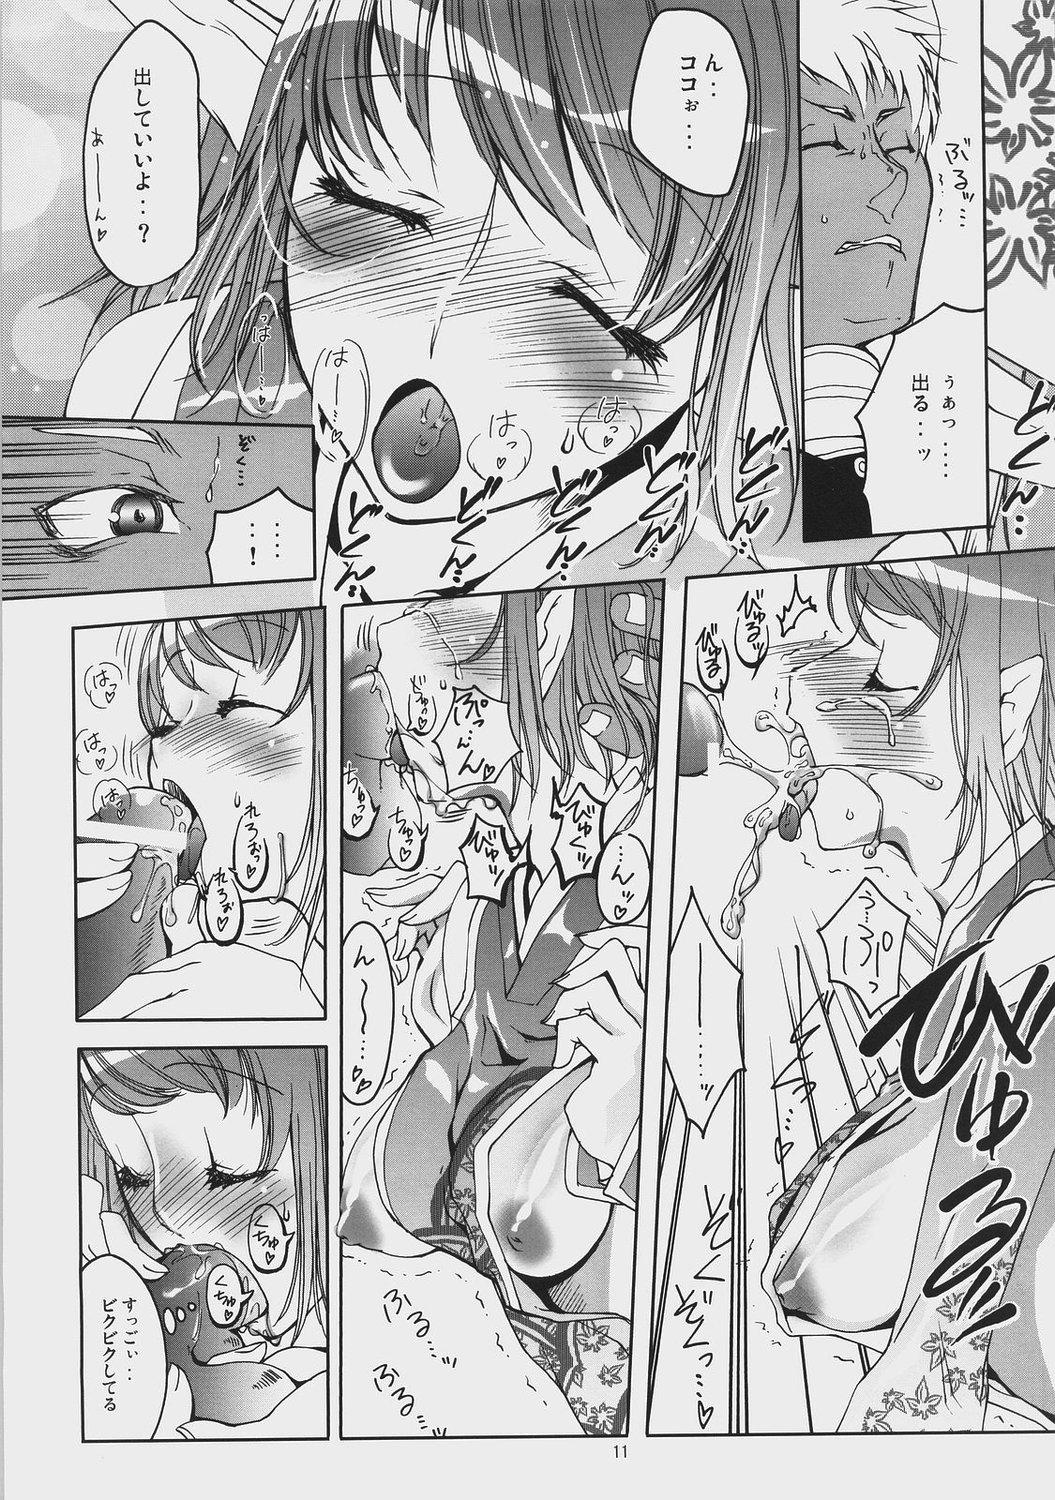 Interracial Sex Beauty and the Beast - Phantasy star universe Rough - Page 10